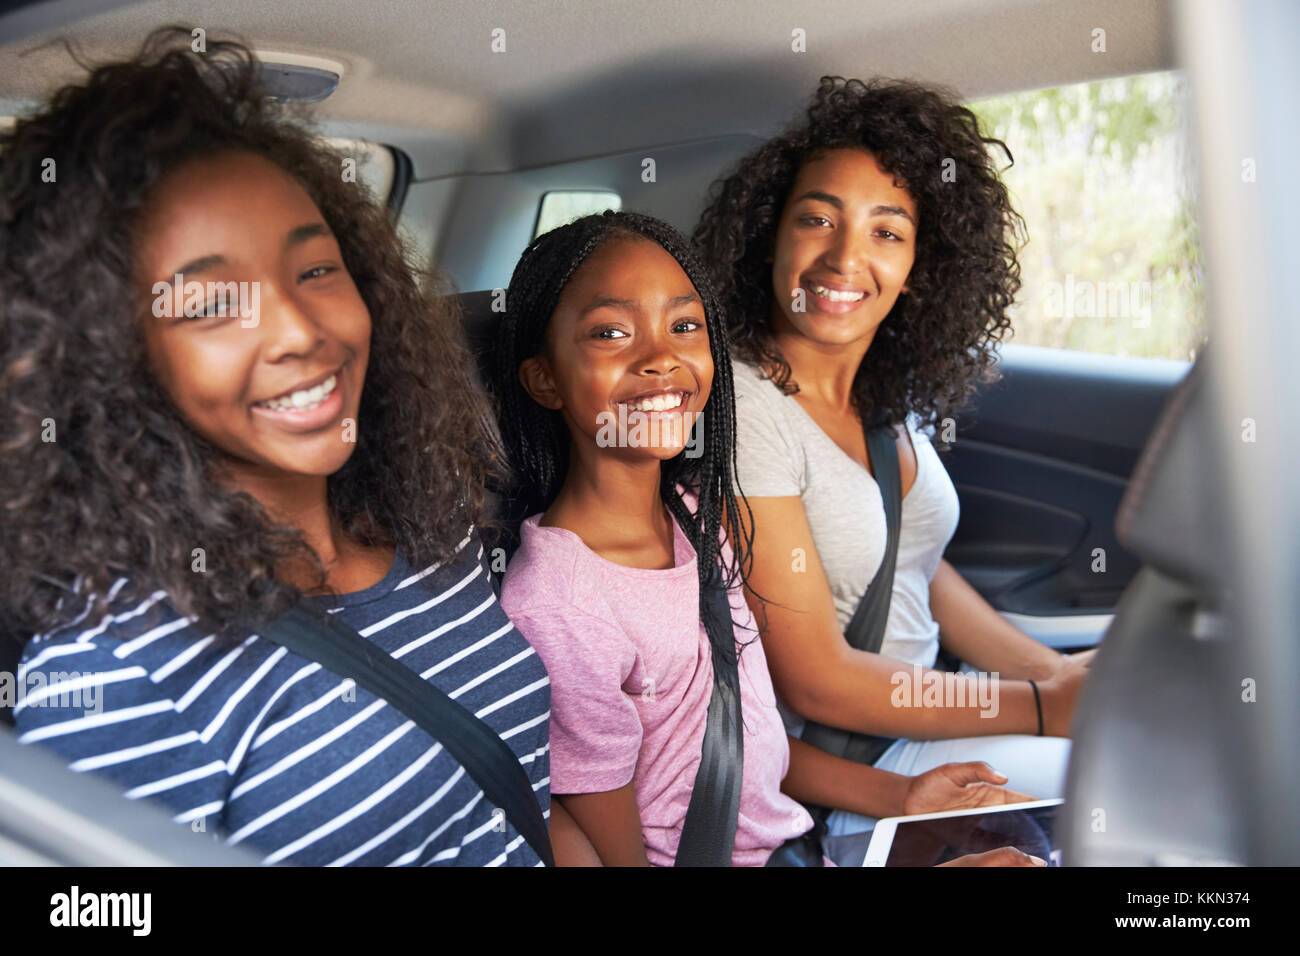 Portrait Of Family With Teenage Children In Car On Road Trip Stock Photo